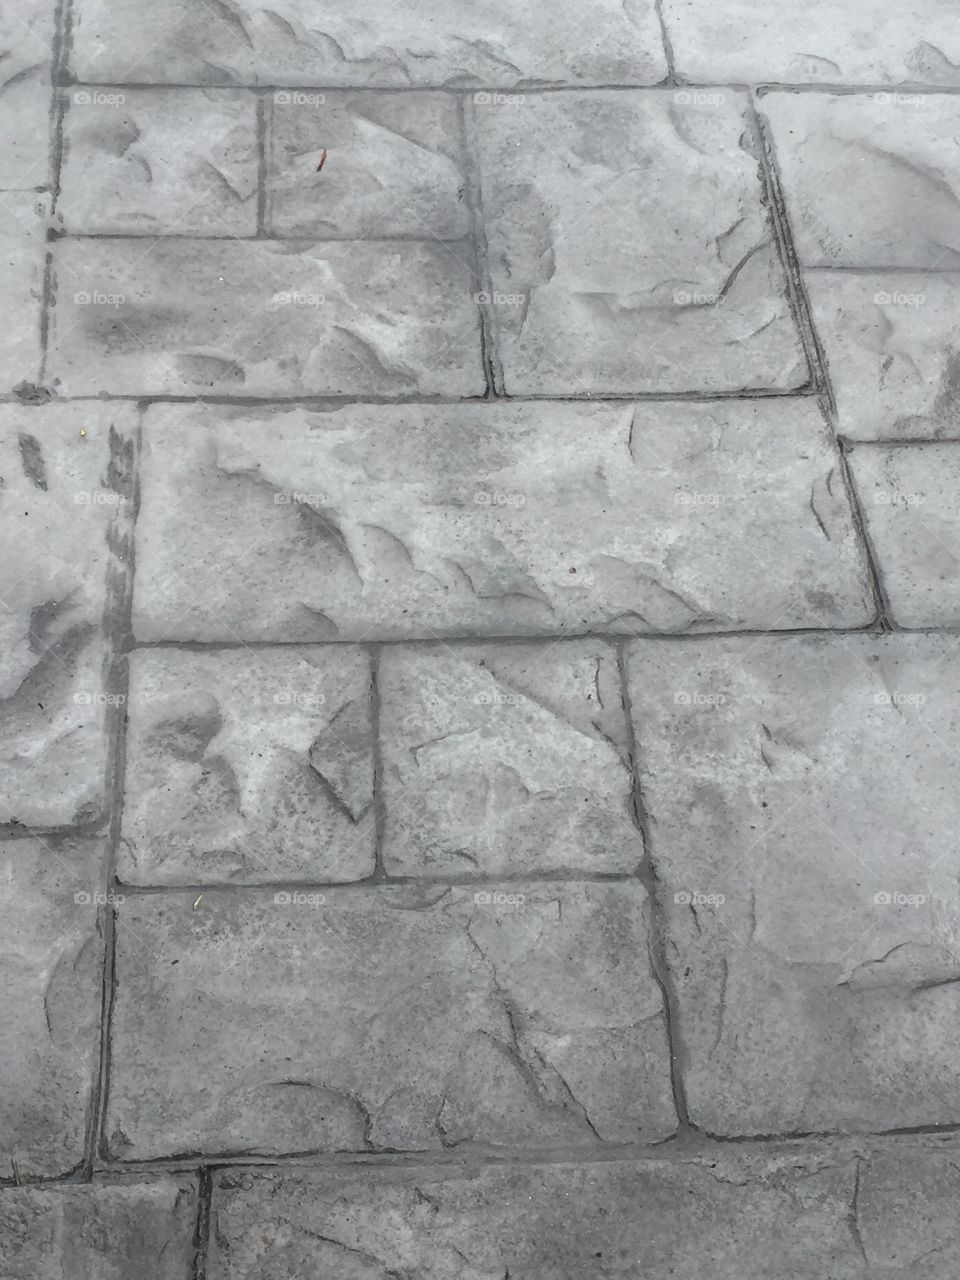 Stamped concrete 